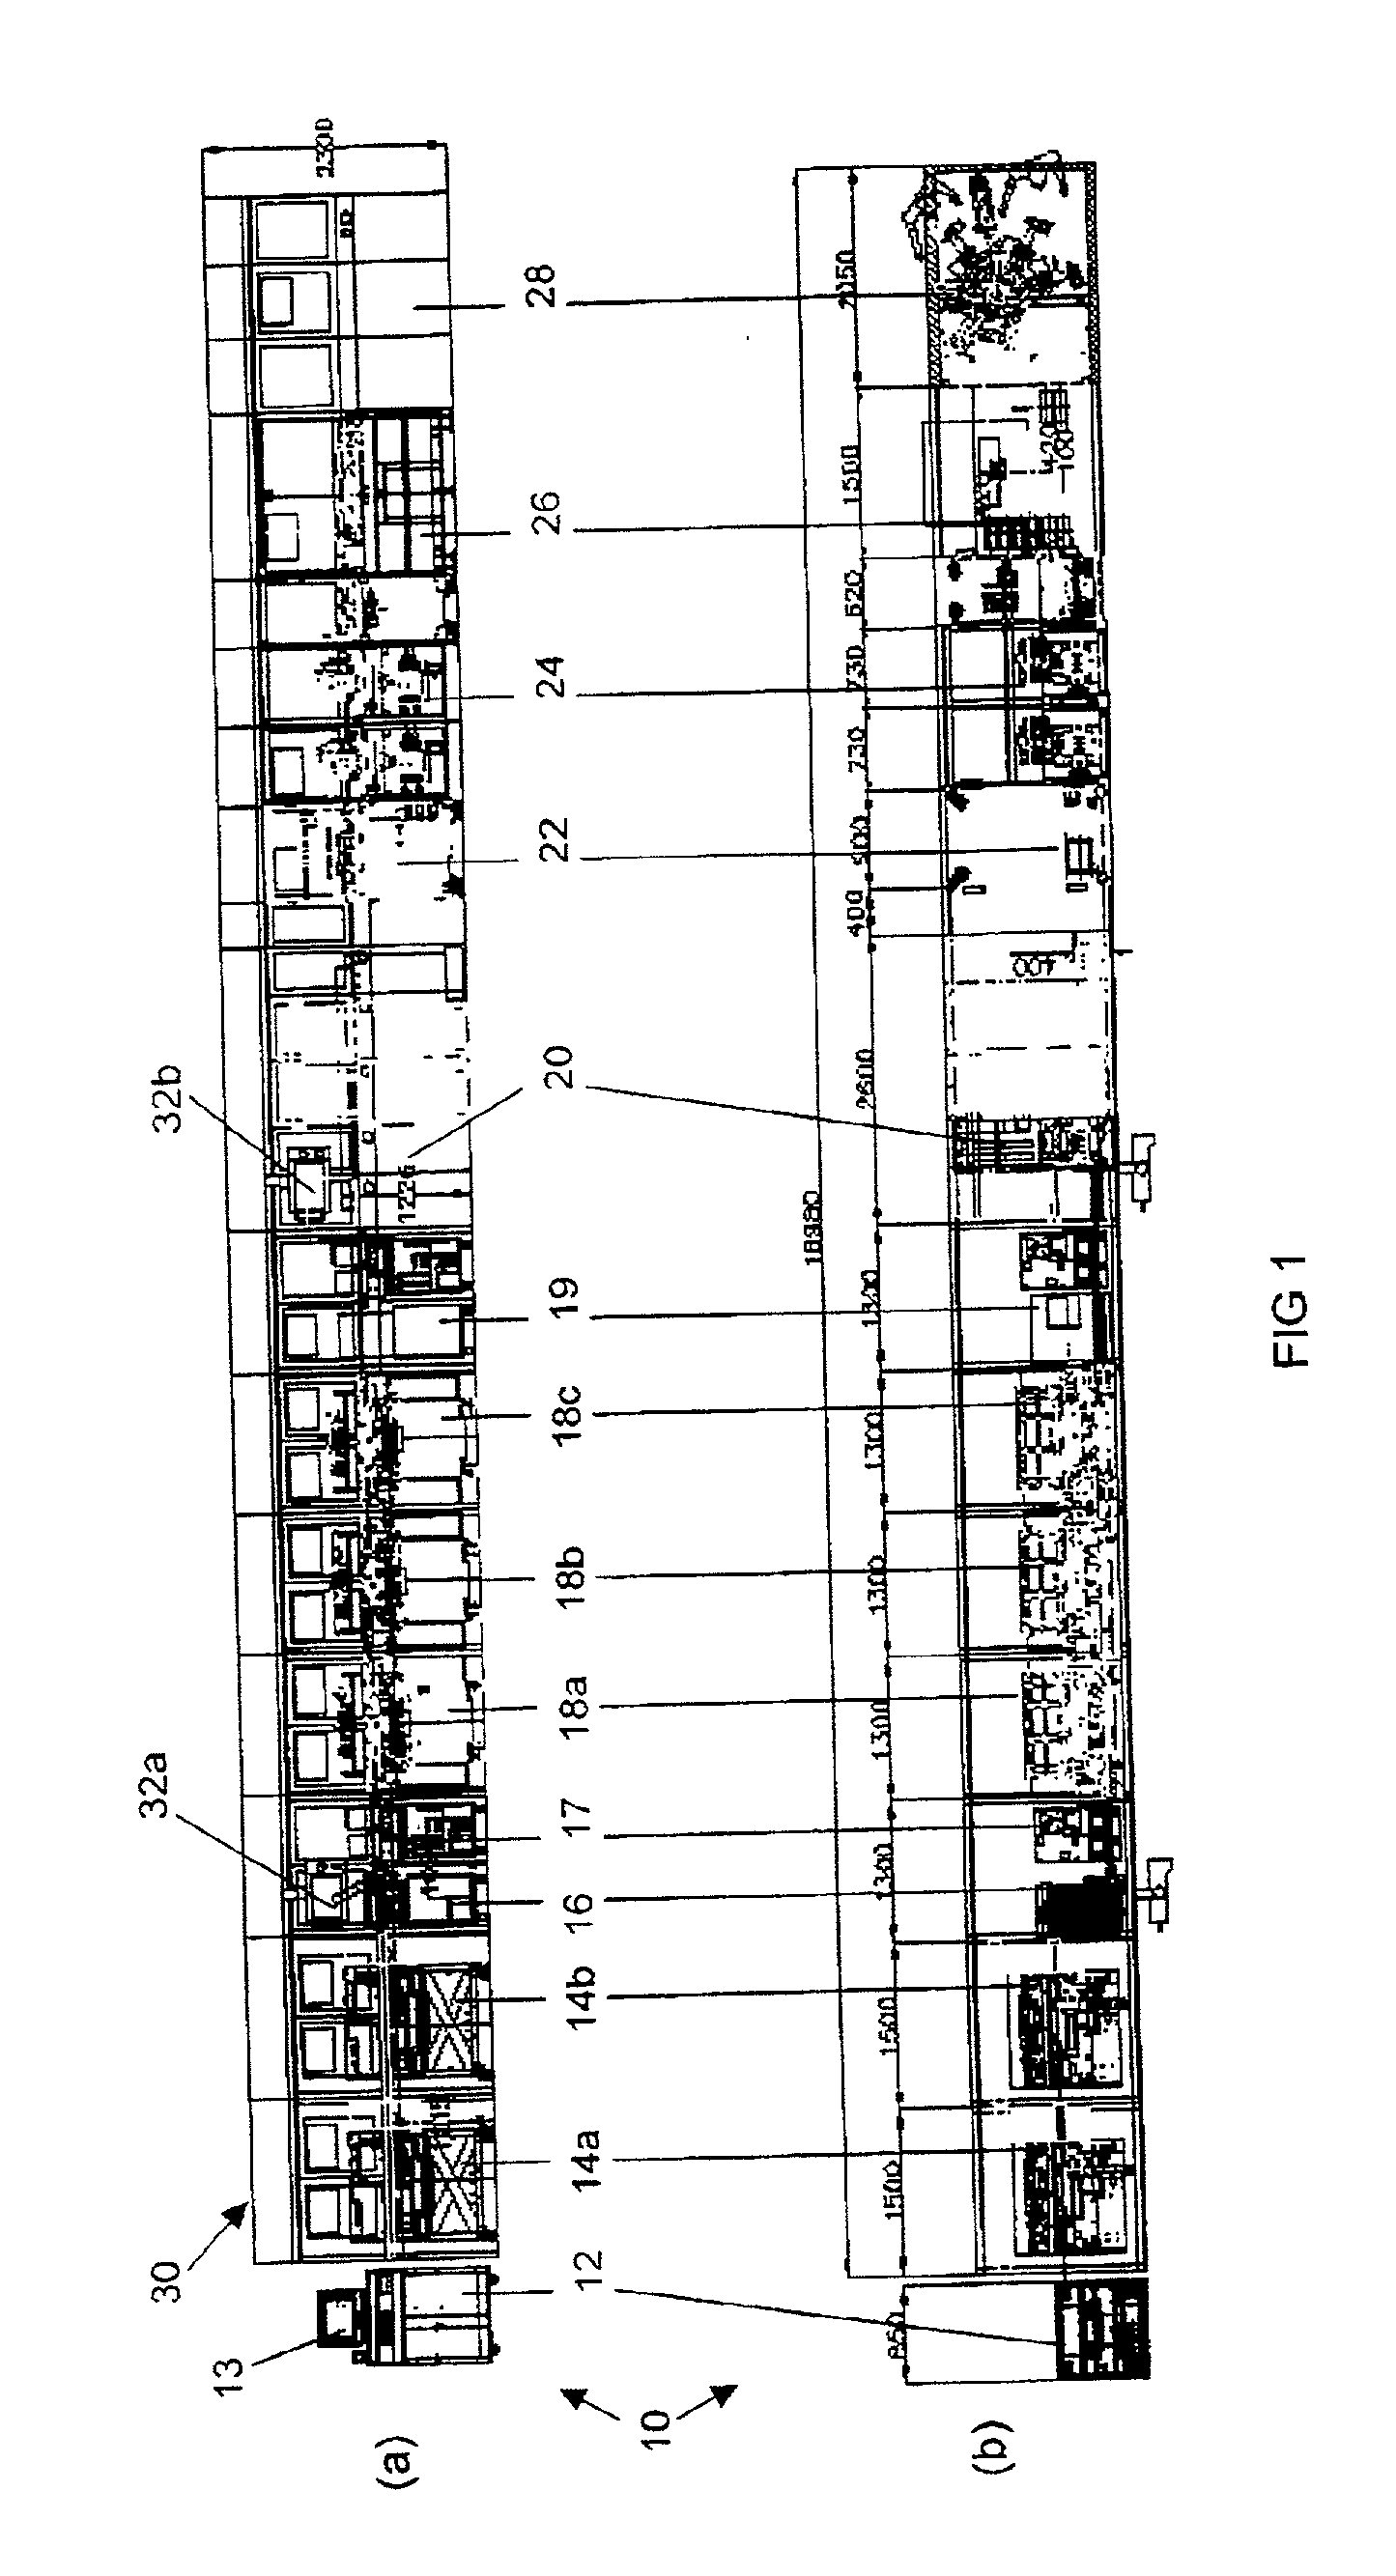 Apparatus for assembling integrated circuit packages